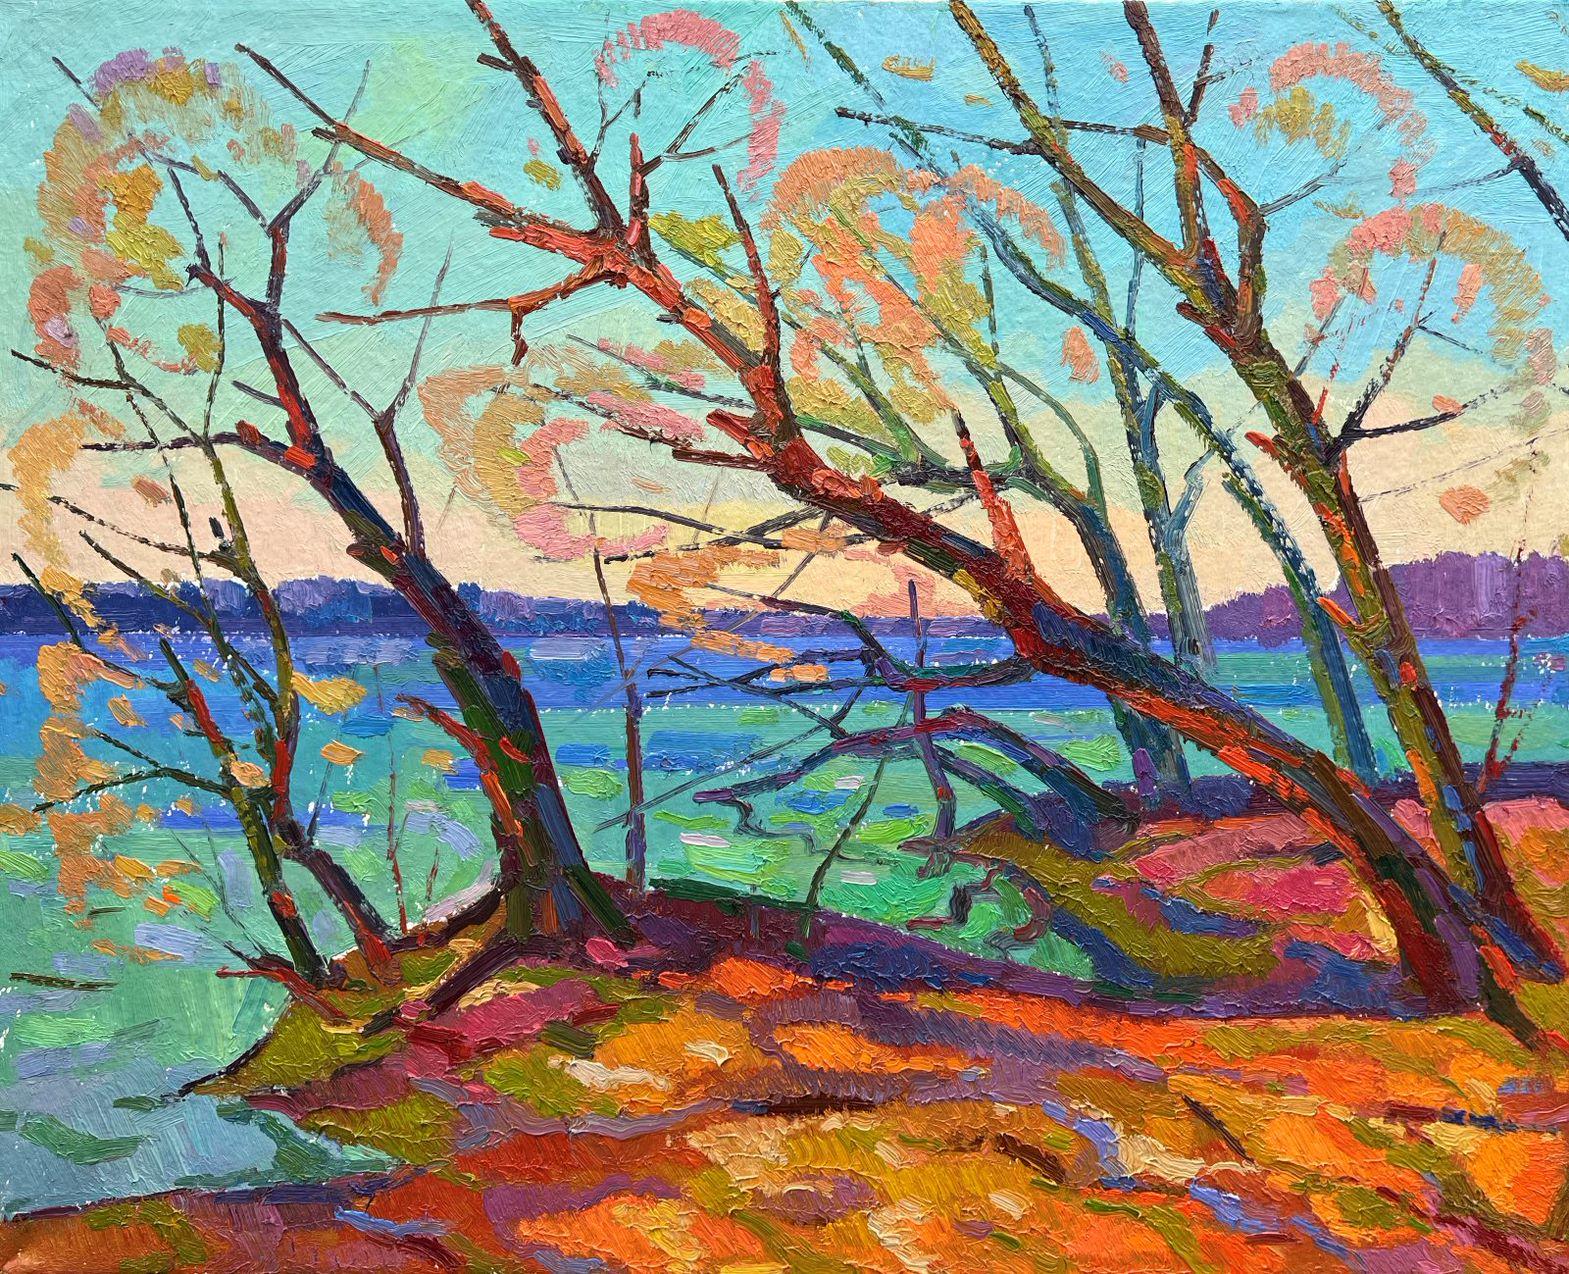 Peter Tovpev Landscape Painting - Autumn Coast, Original oil Painting, Ready to Hang